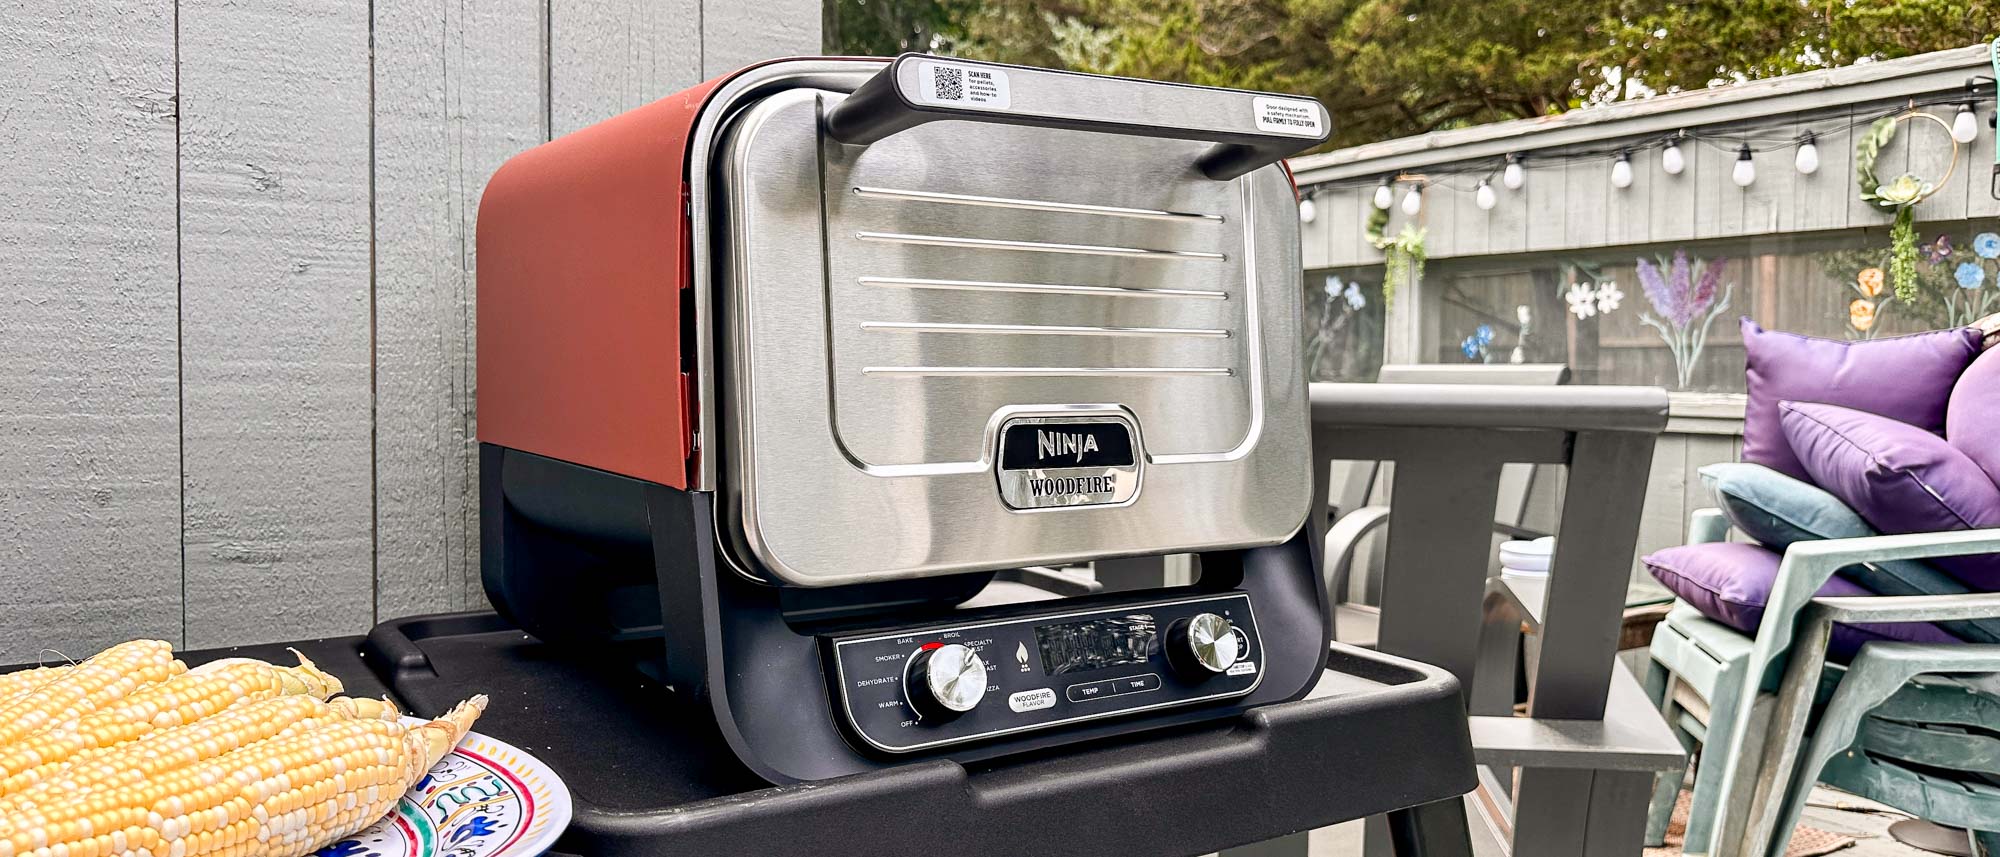 Ninja is launching its first outdoor appliance, the Woodfire Grill